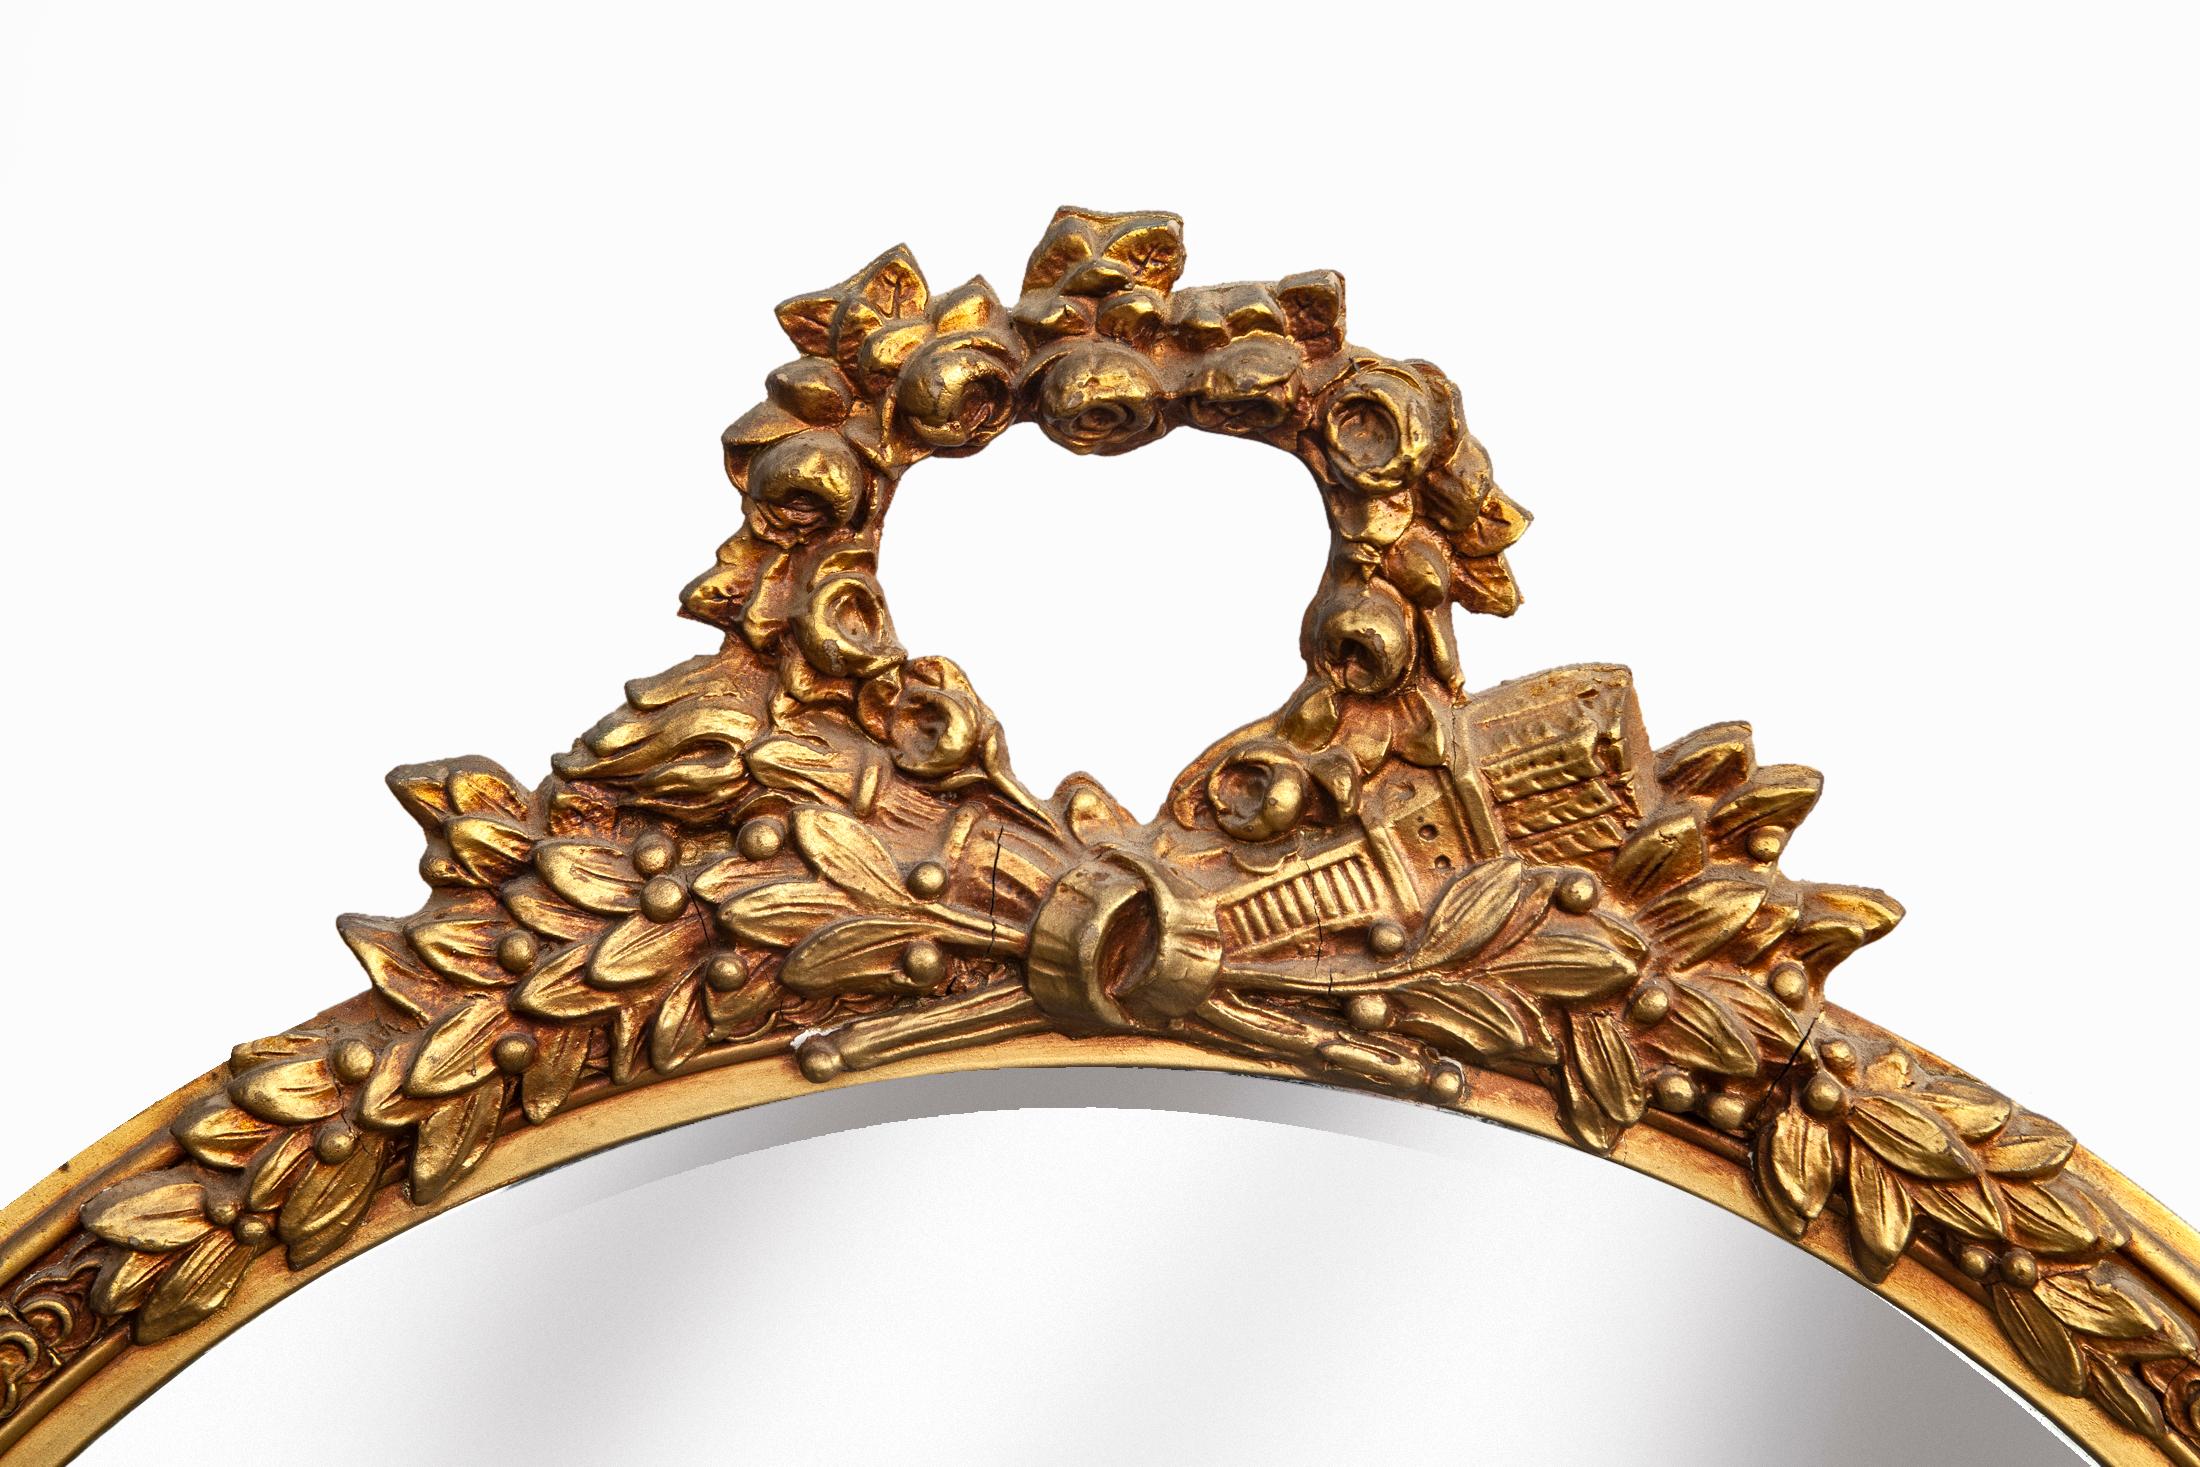 1940s Round Gold Mirror Wreath Crown.
Carved frame topped with a wreath, original gold finish, as found.
Very sturdy & well crafted. New backing & wire.